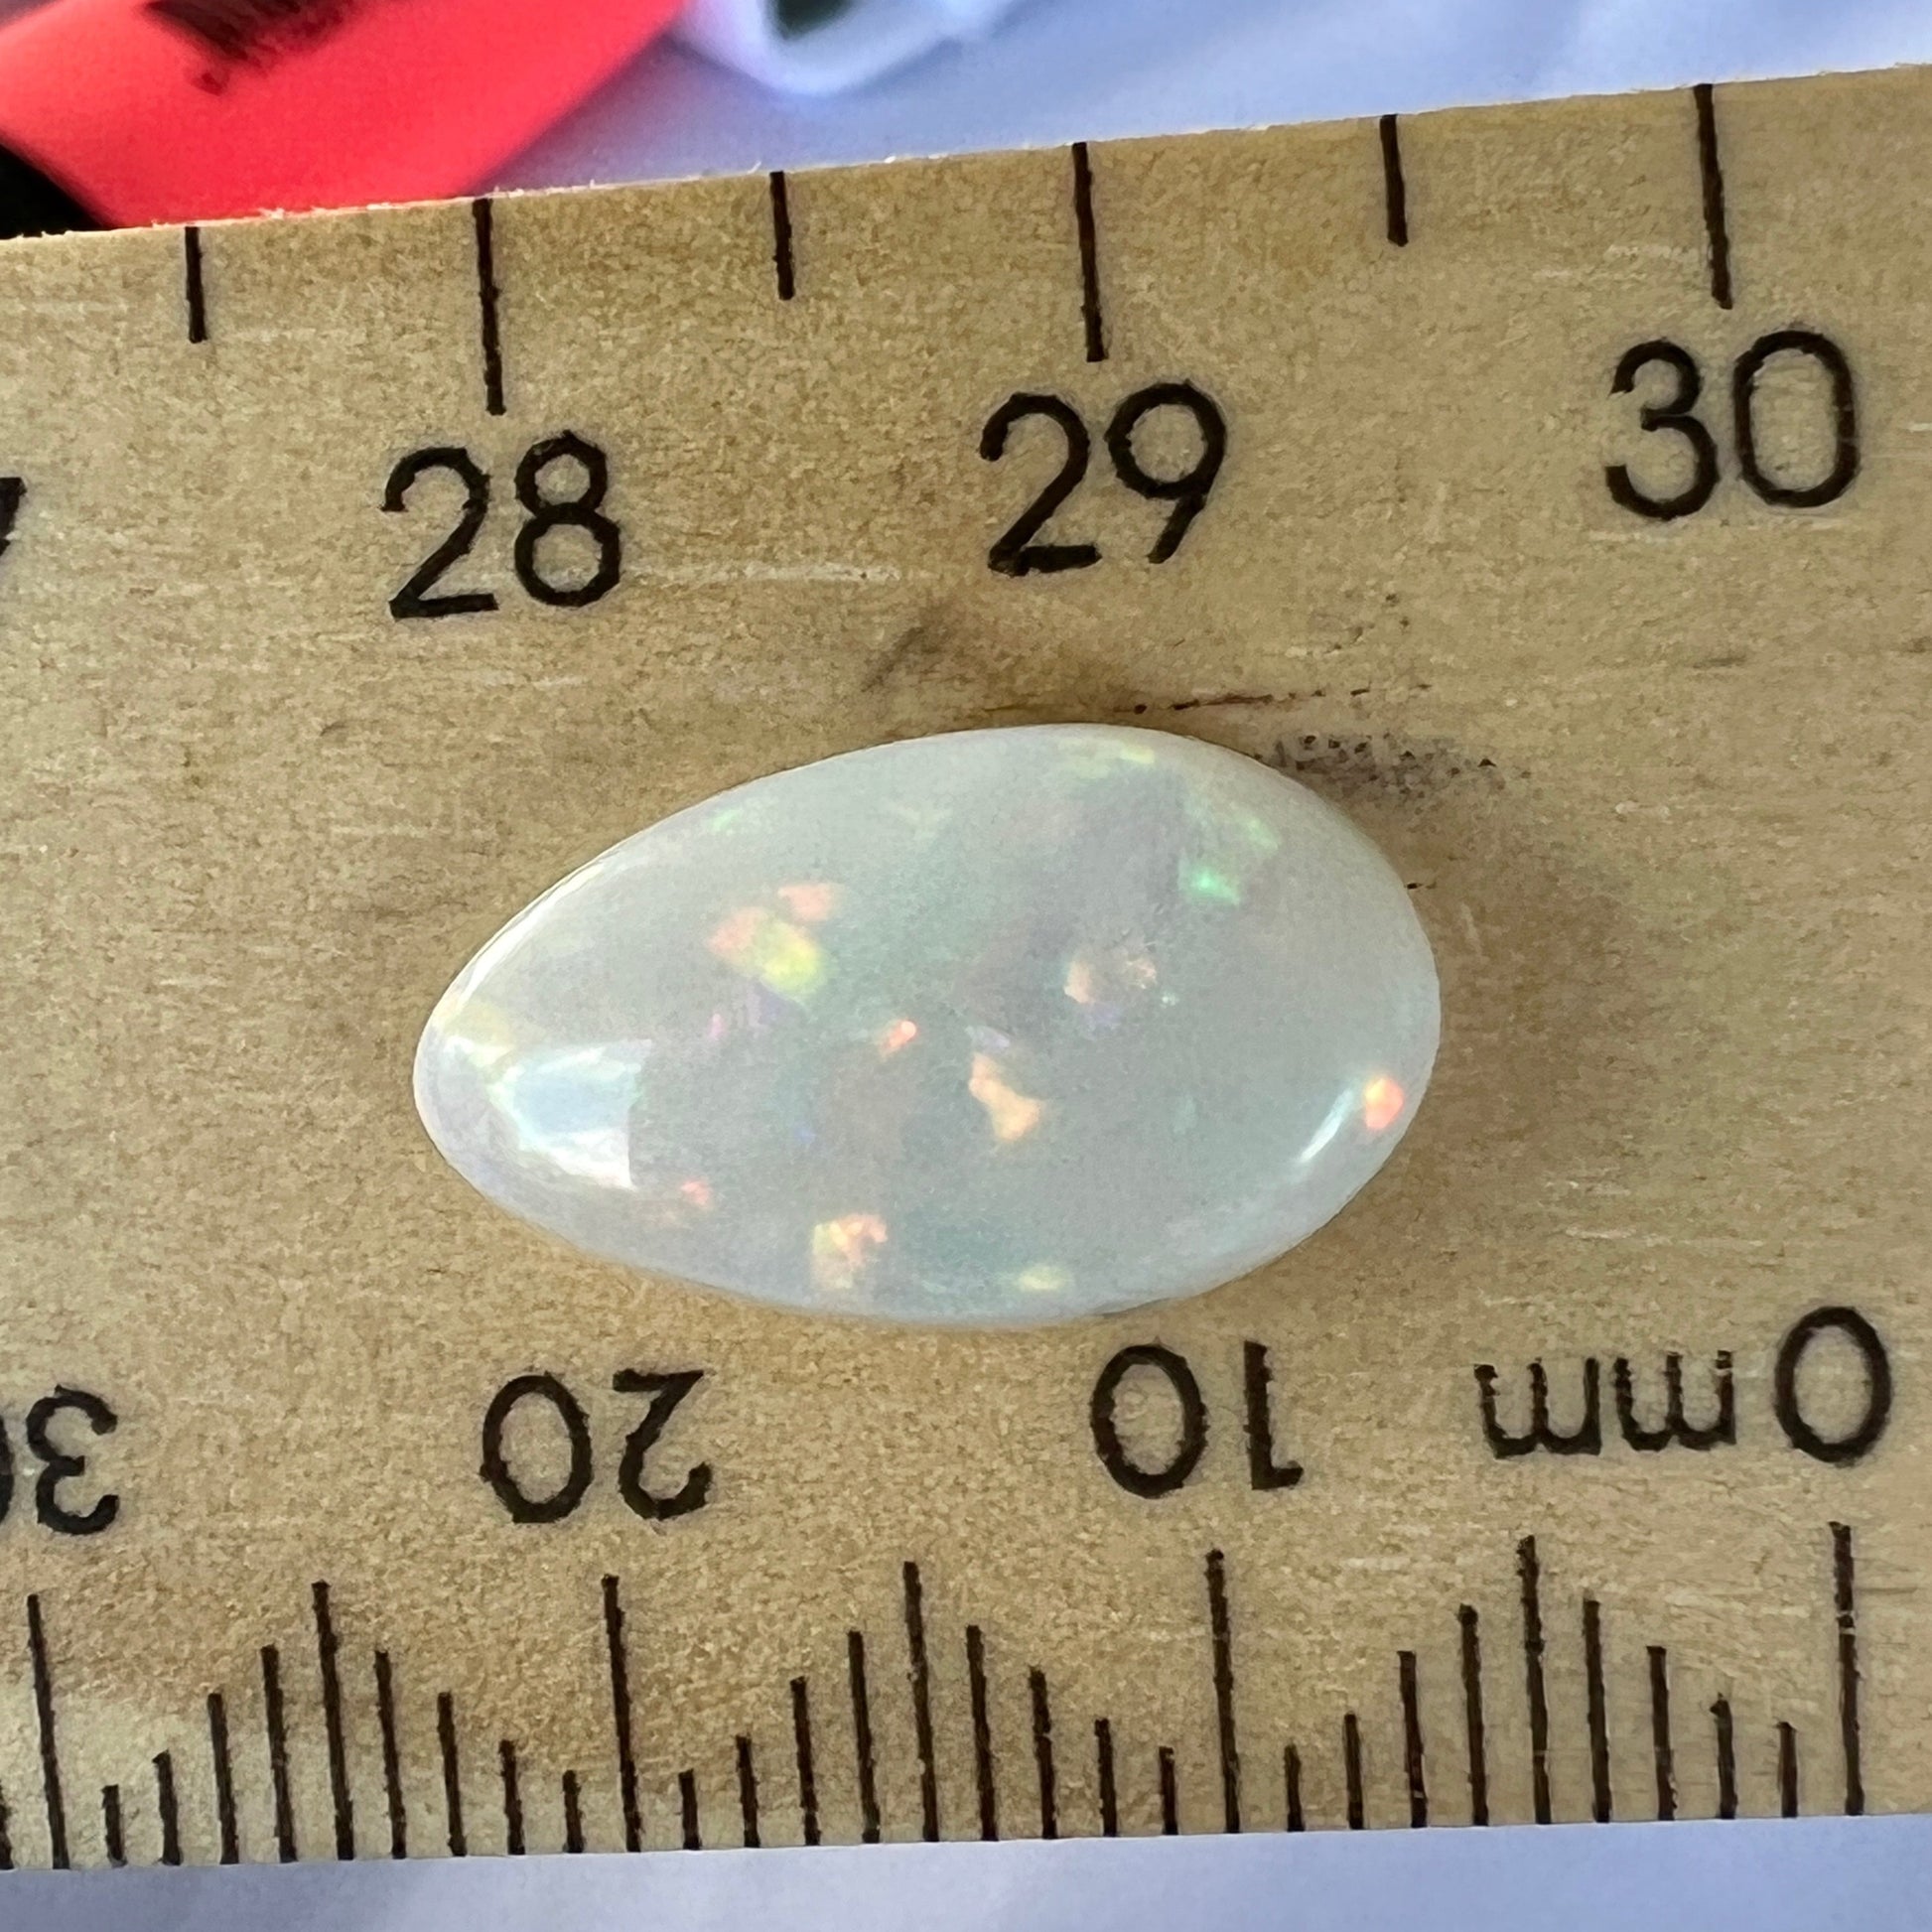 Stunning Coober Pedy opal displaying wonderful colours. Beautifully cut and polished, ready to set.